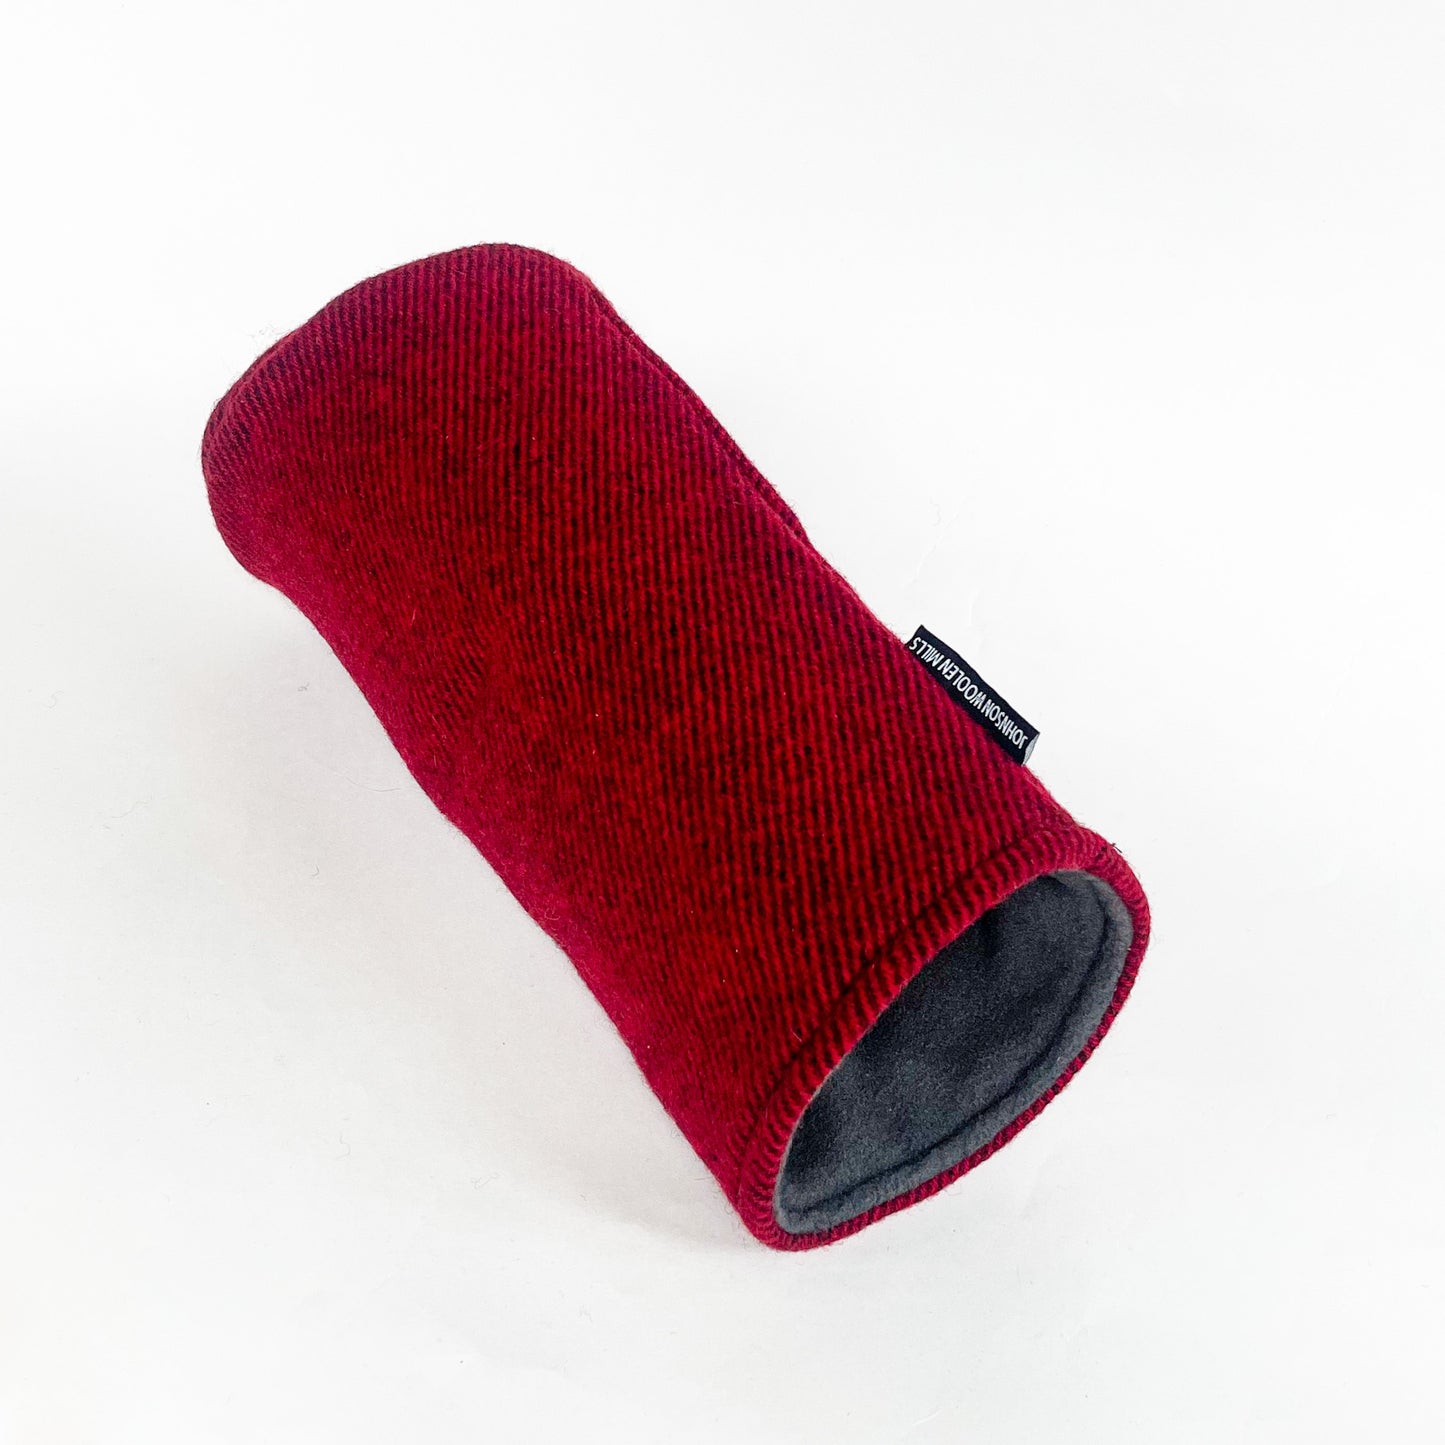 Red twill wool driver headcover interior shown with fleece lining